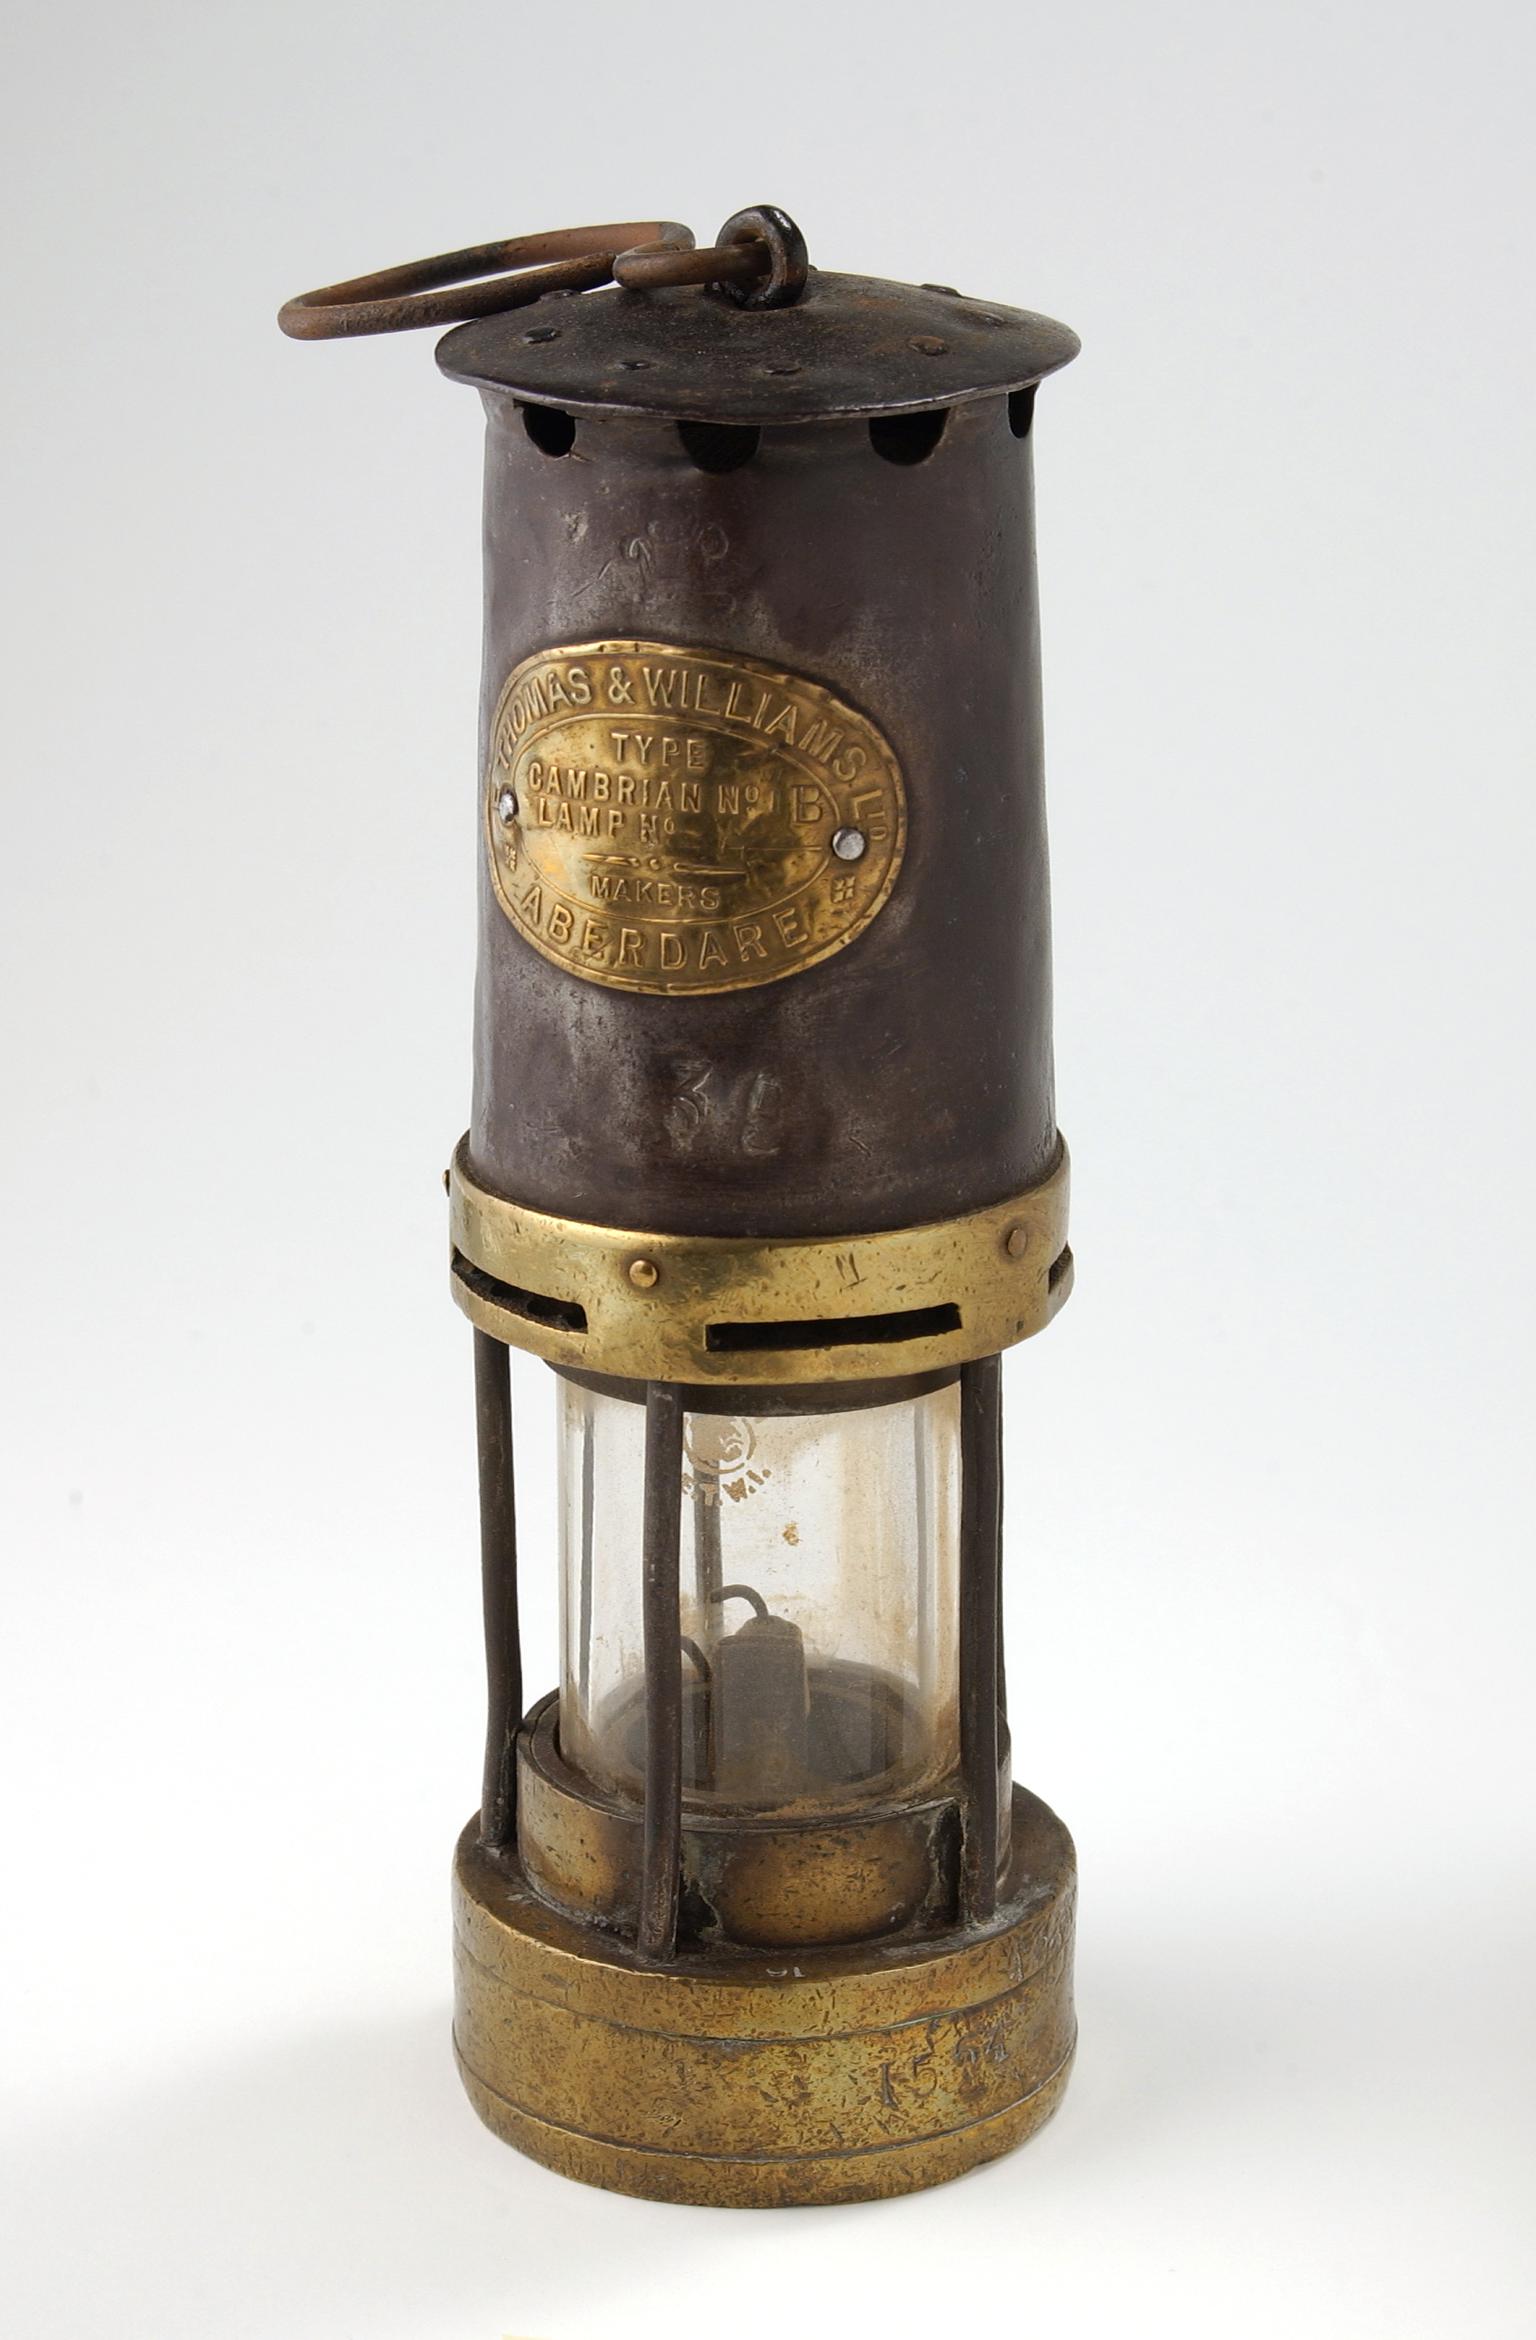 Cambrian No 1B flame safety lamp